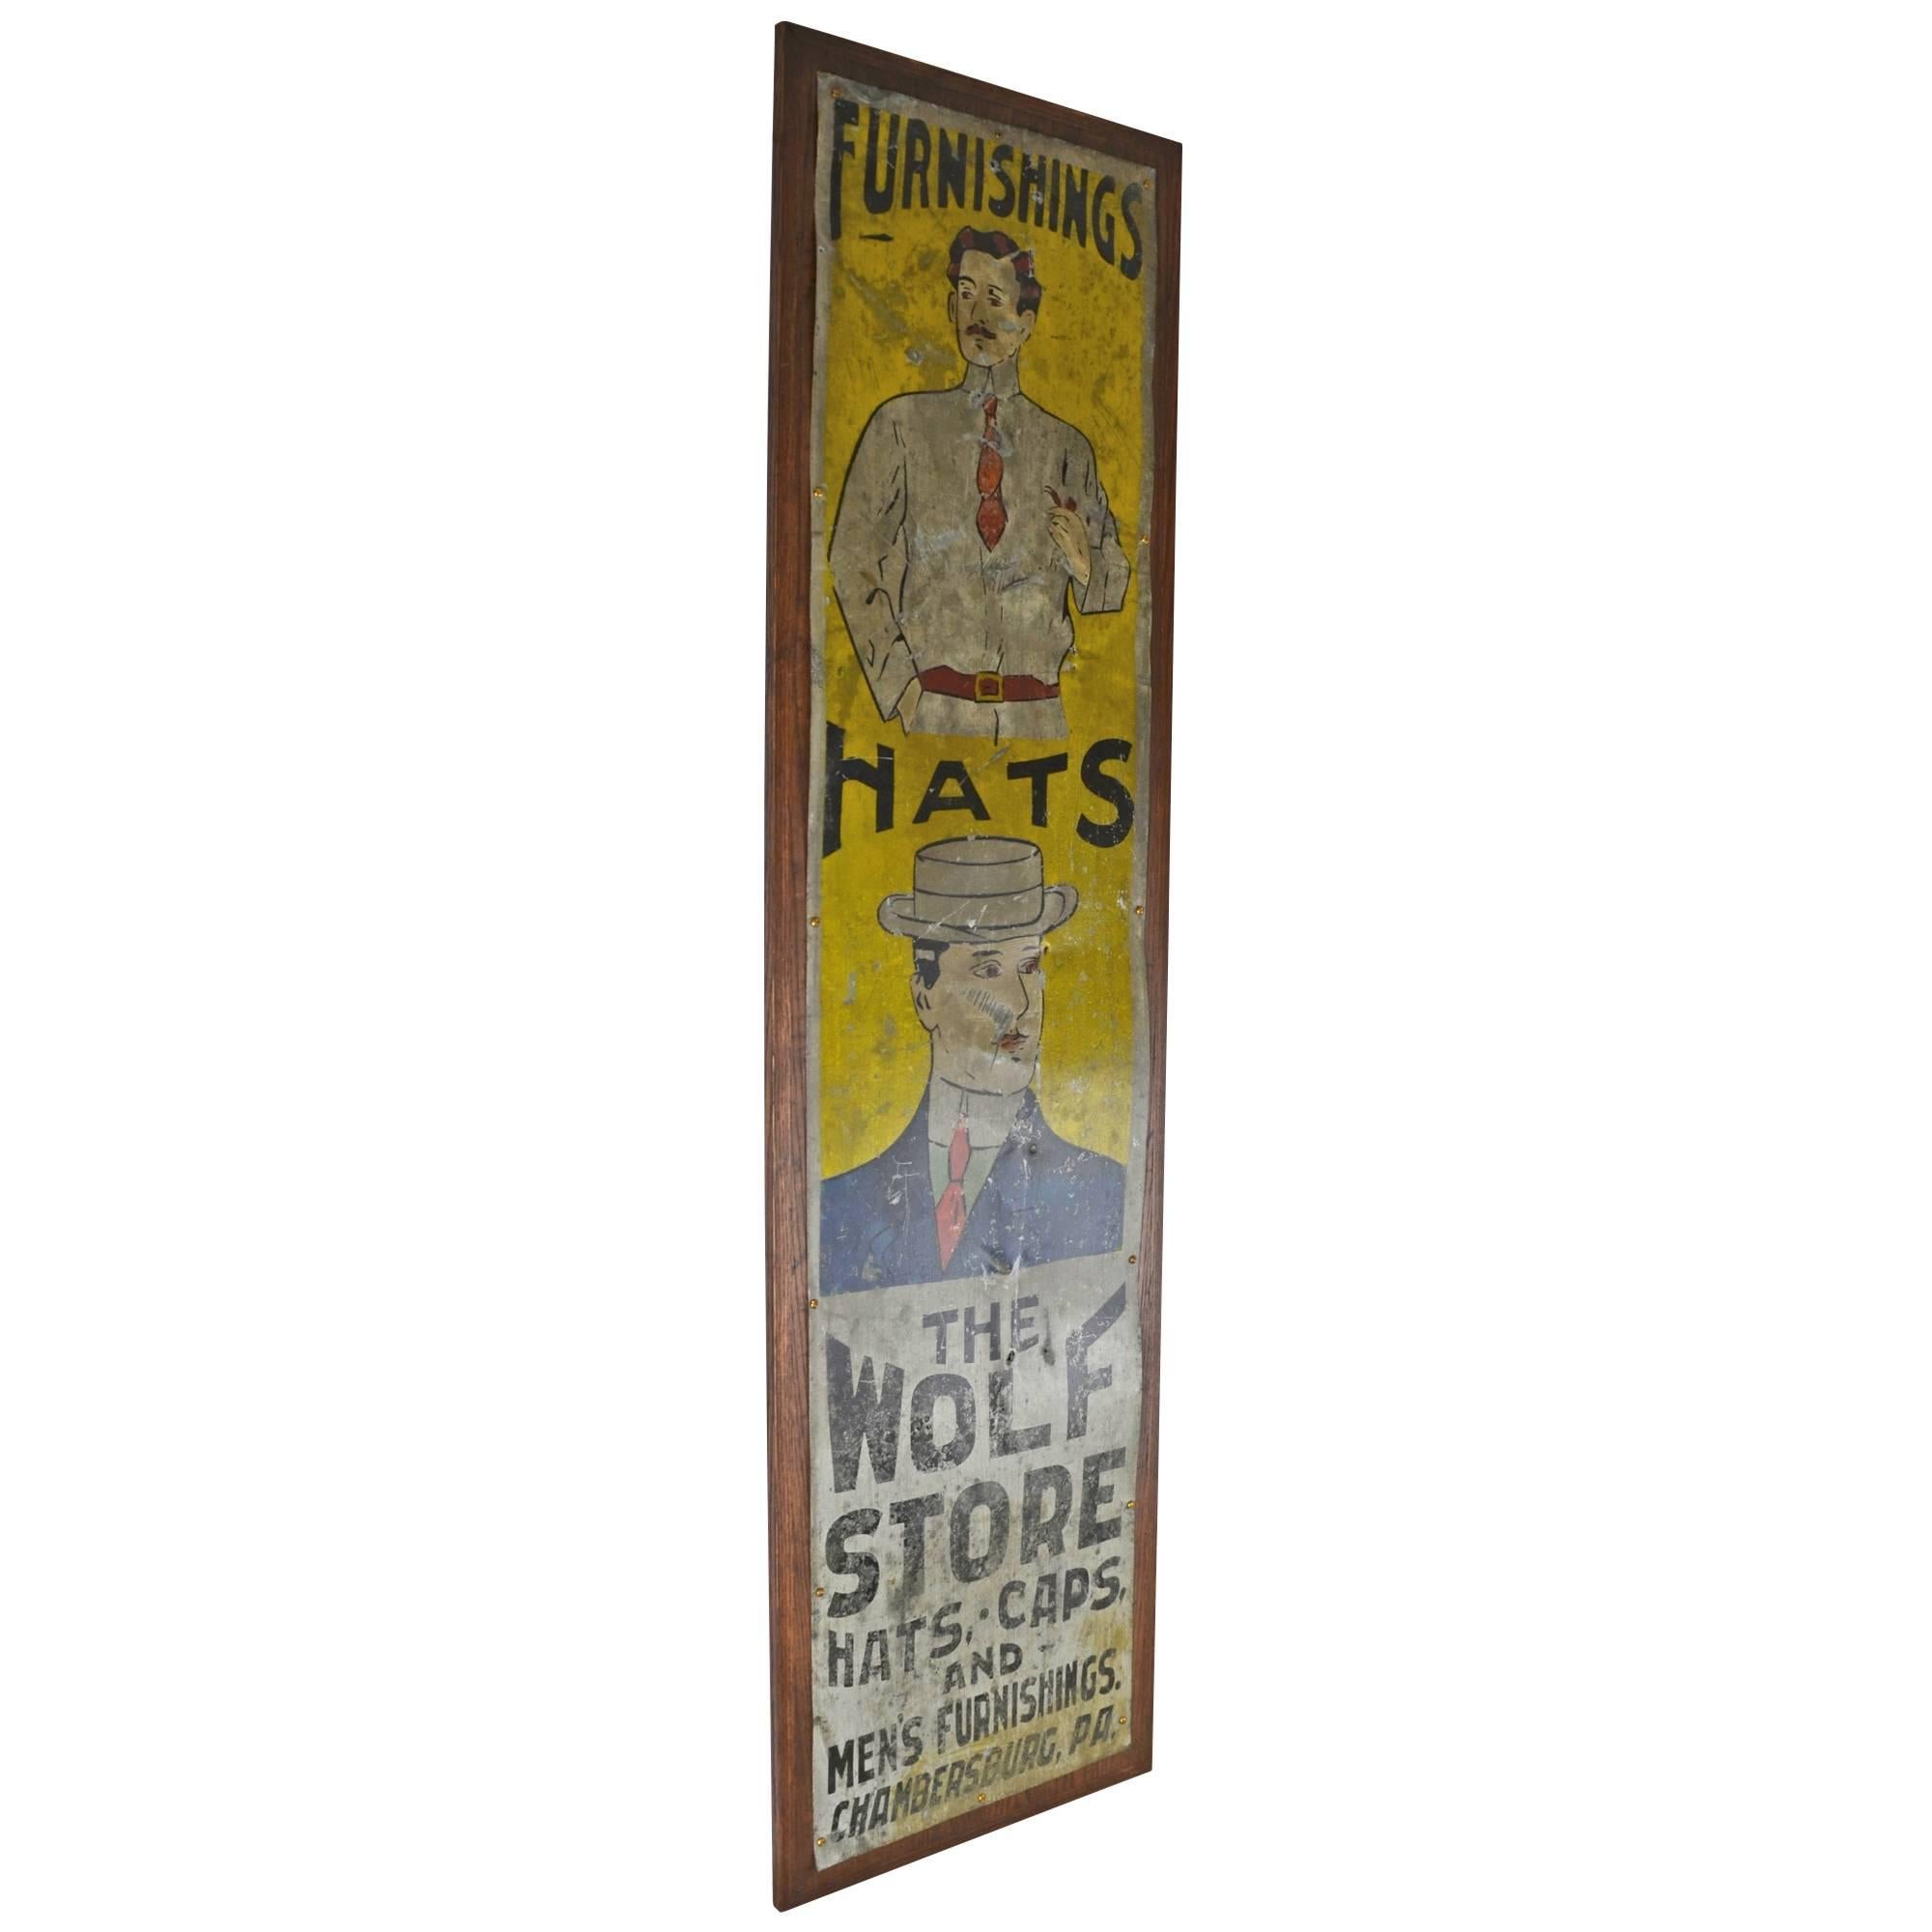 What could be more dapper? This hand-painted sign features gentlemen of the period (early 20th century) sporting the finest styles of the day: high, starched collars, straw hats and smartly-cropped mustaches and hair cuts. While the Wolf Store is